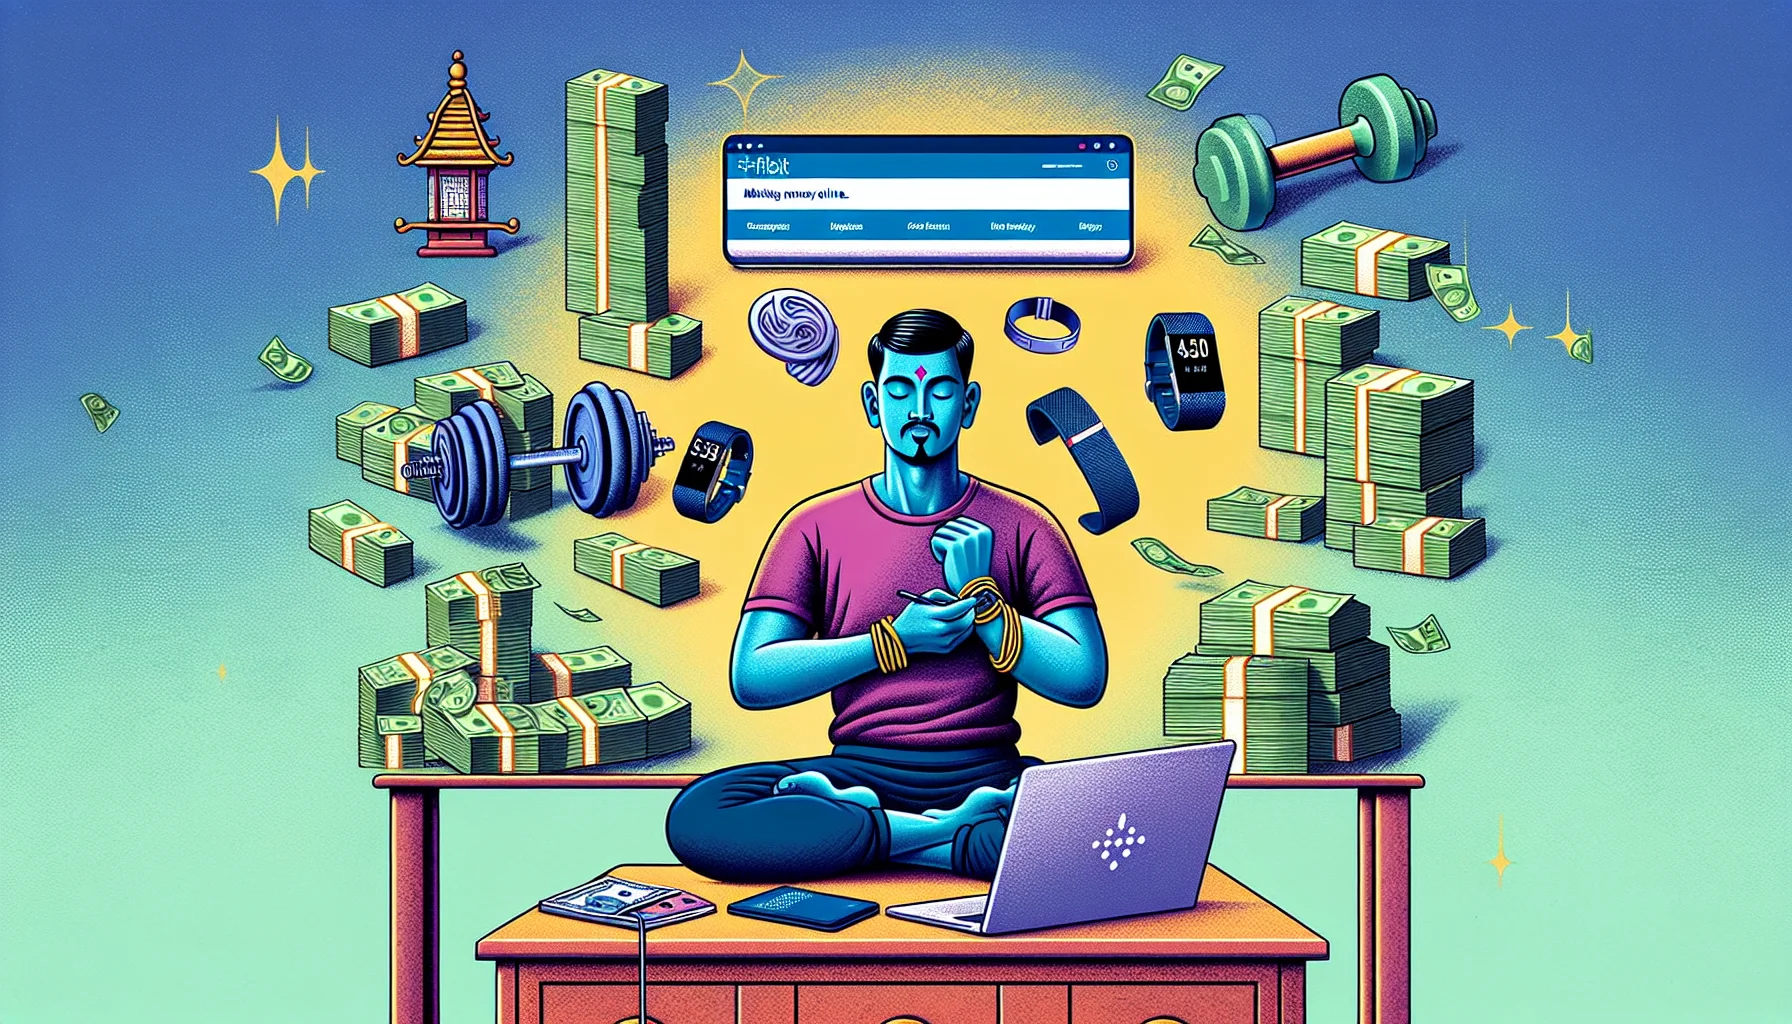 Envision an enticing and humorous scene related to making money online, featuring a lifestyle focused on fitness and health. In the center, a character meticulously organizes stacks of bills on a table in front of a laptop displaying a Fitbit homepage. The character, a South Asian male, exudes a touch of absurdity by wearing multiple Fitbit devices on both arms, while simultaneously attempting some light yoga stretches. Around him, humorous elements related to fitness and well-being, like dumbbells serving as paperweights, reflect a larger, lighthearted narrative of profuse lucrative prospects with a Fitbit affiliate program.